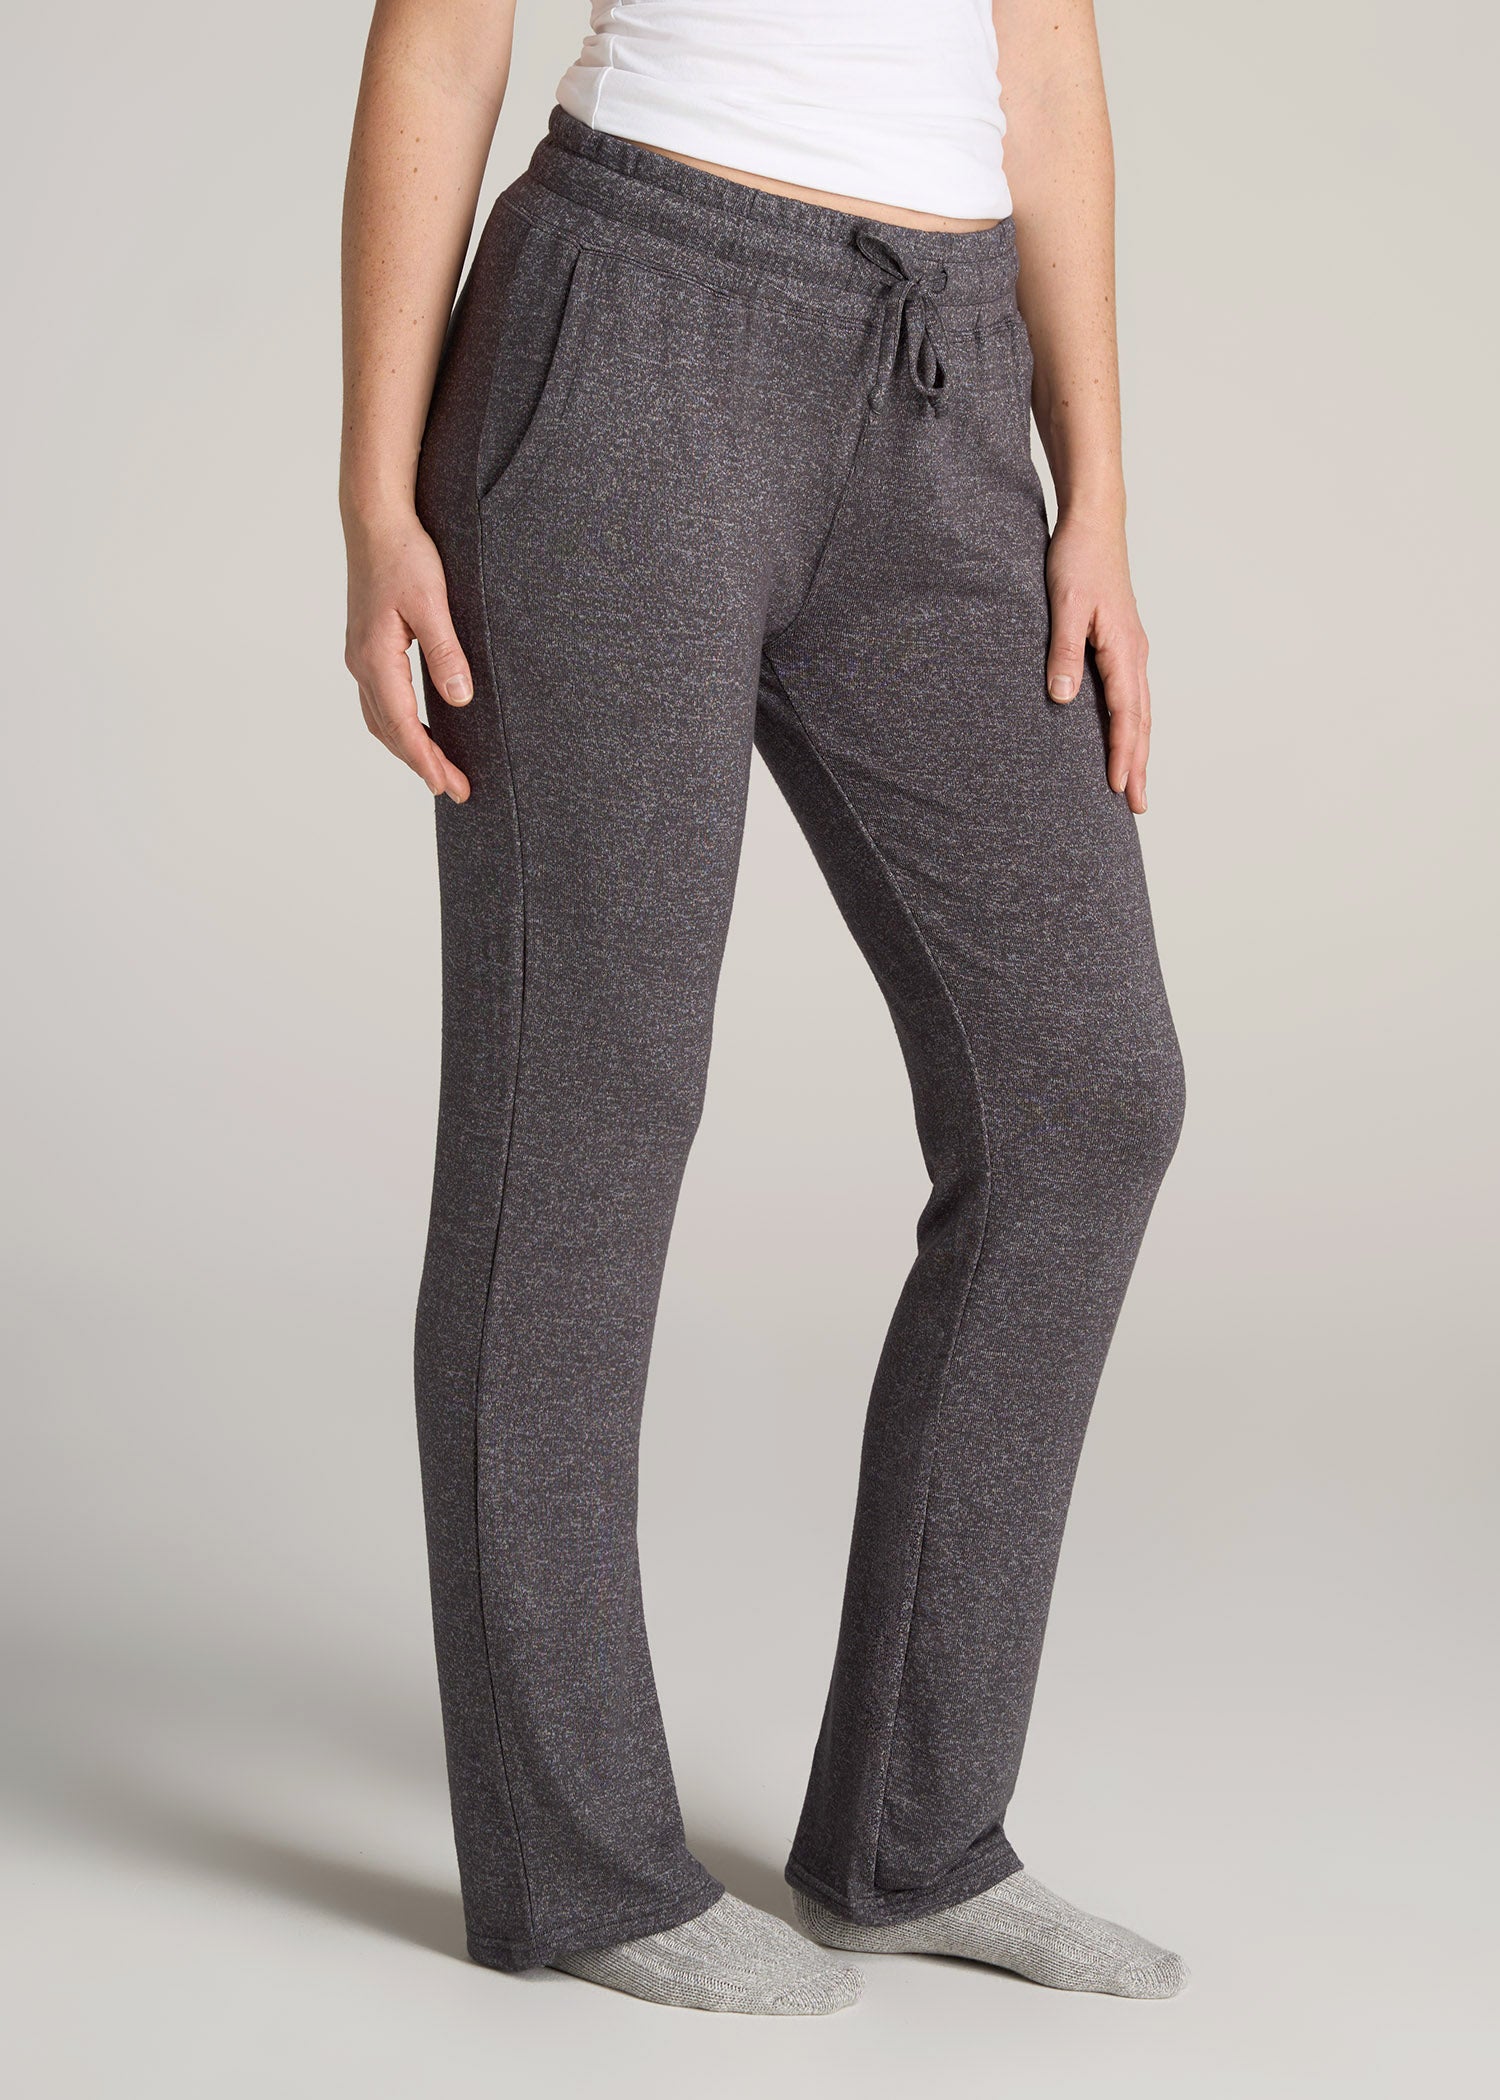 Women's Tall Lounge Pant Open Bottom Charcoal | American Tall